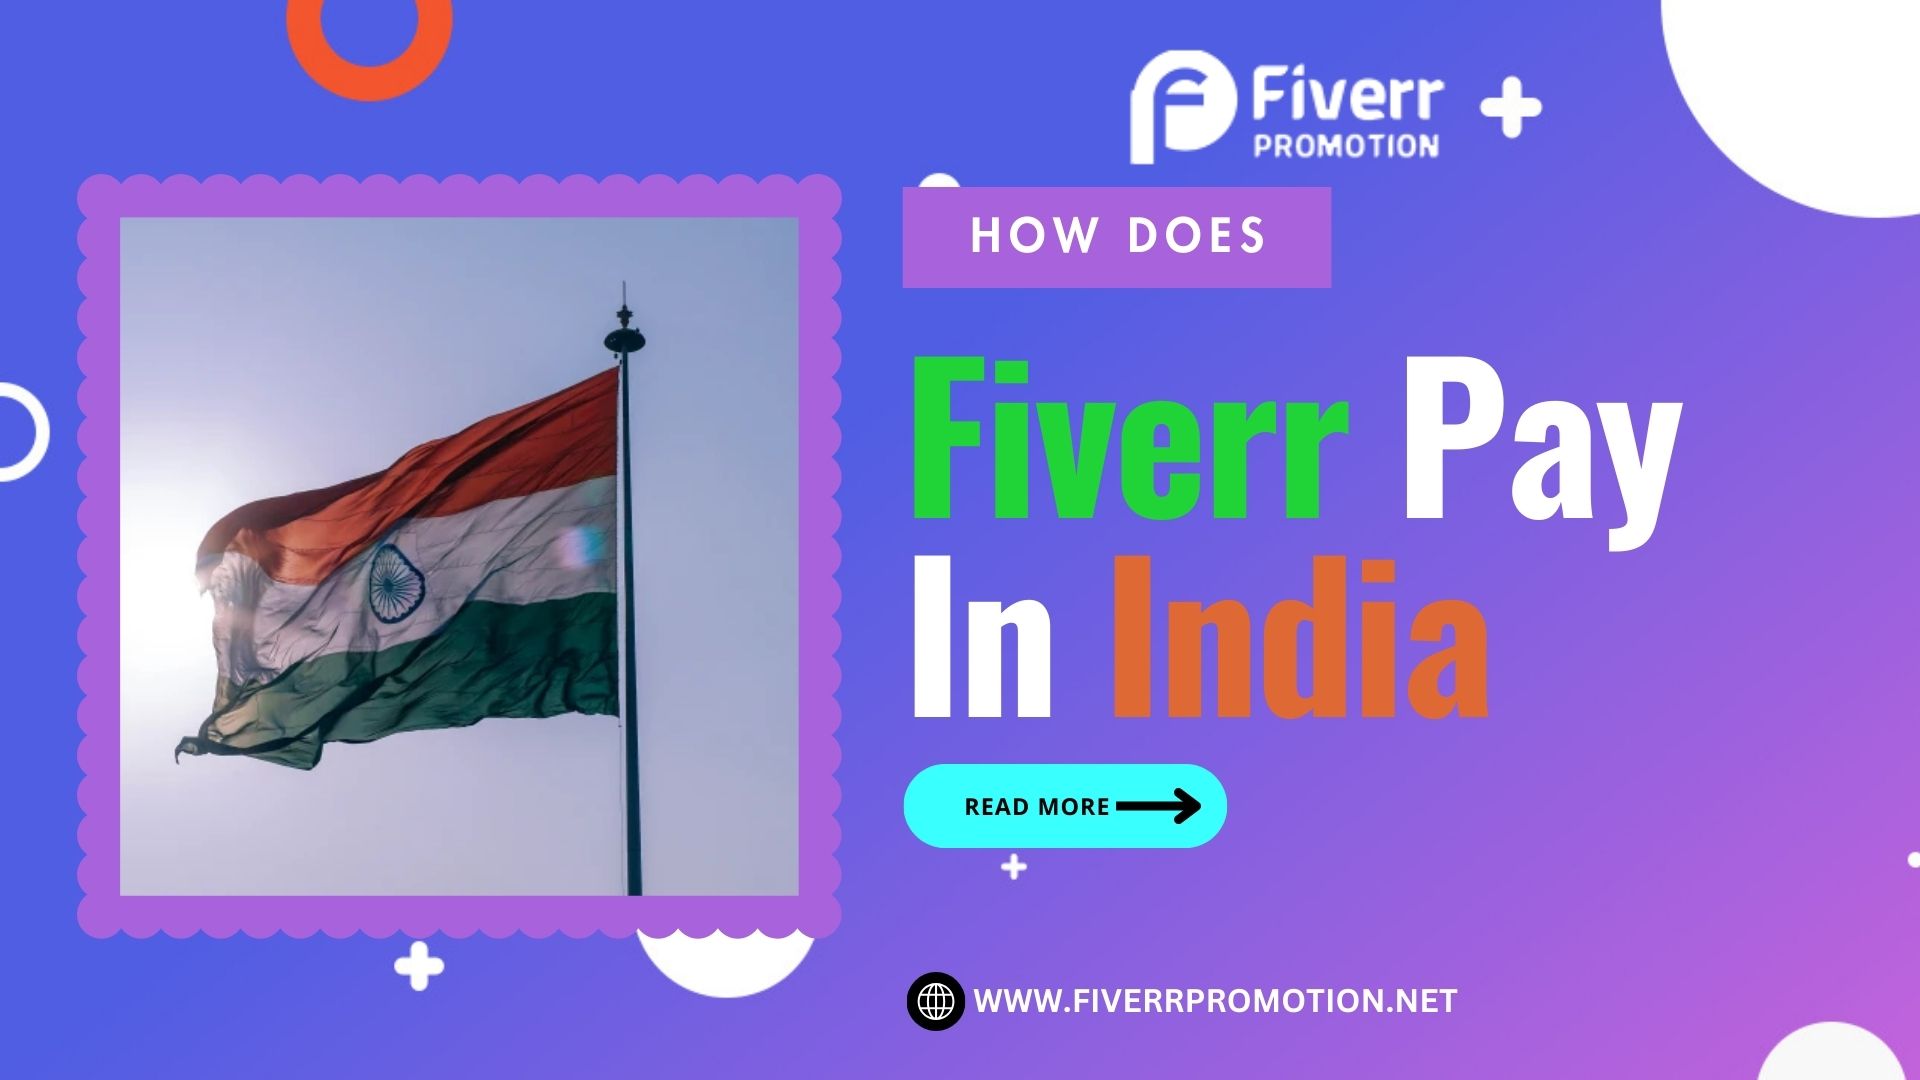 How Does Fiverr Pay in India